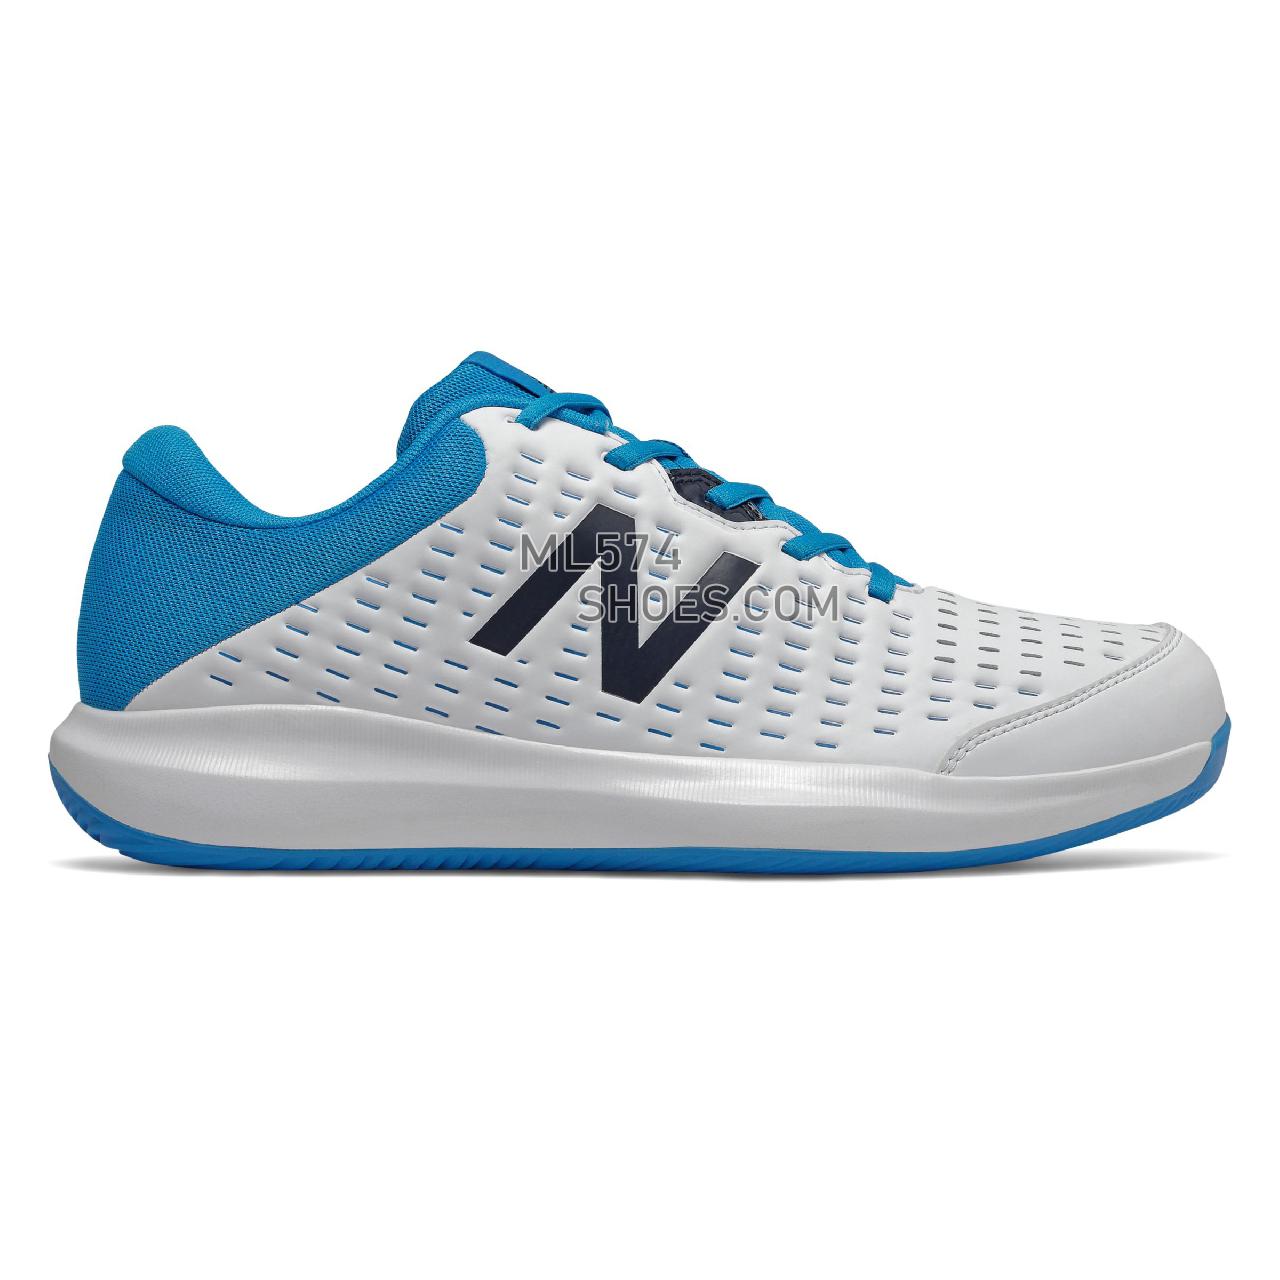 New Balance 696v4 - Men's Tennis - White with Blue and Black - MCH696R4